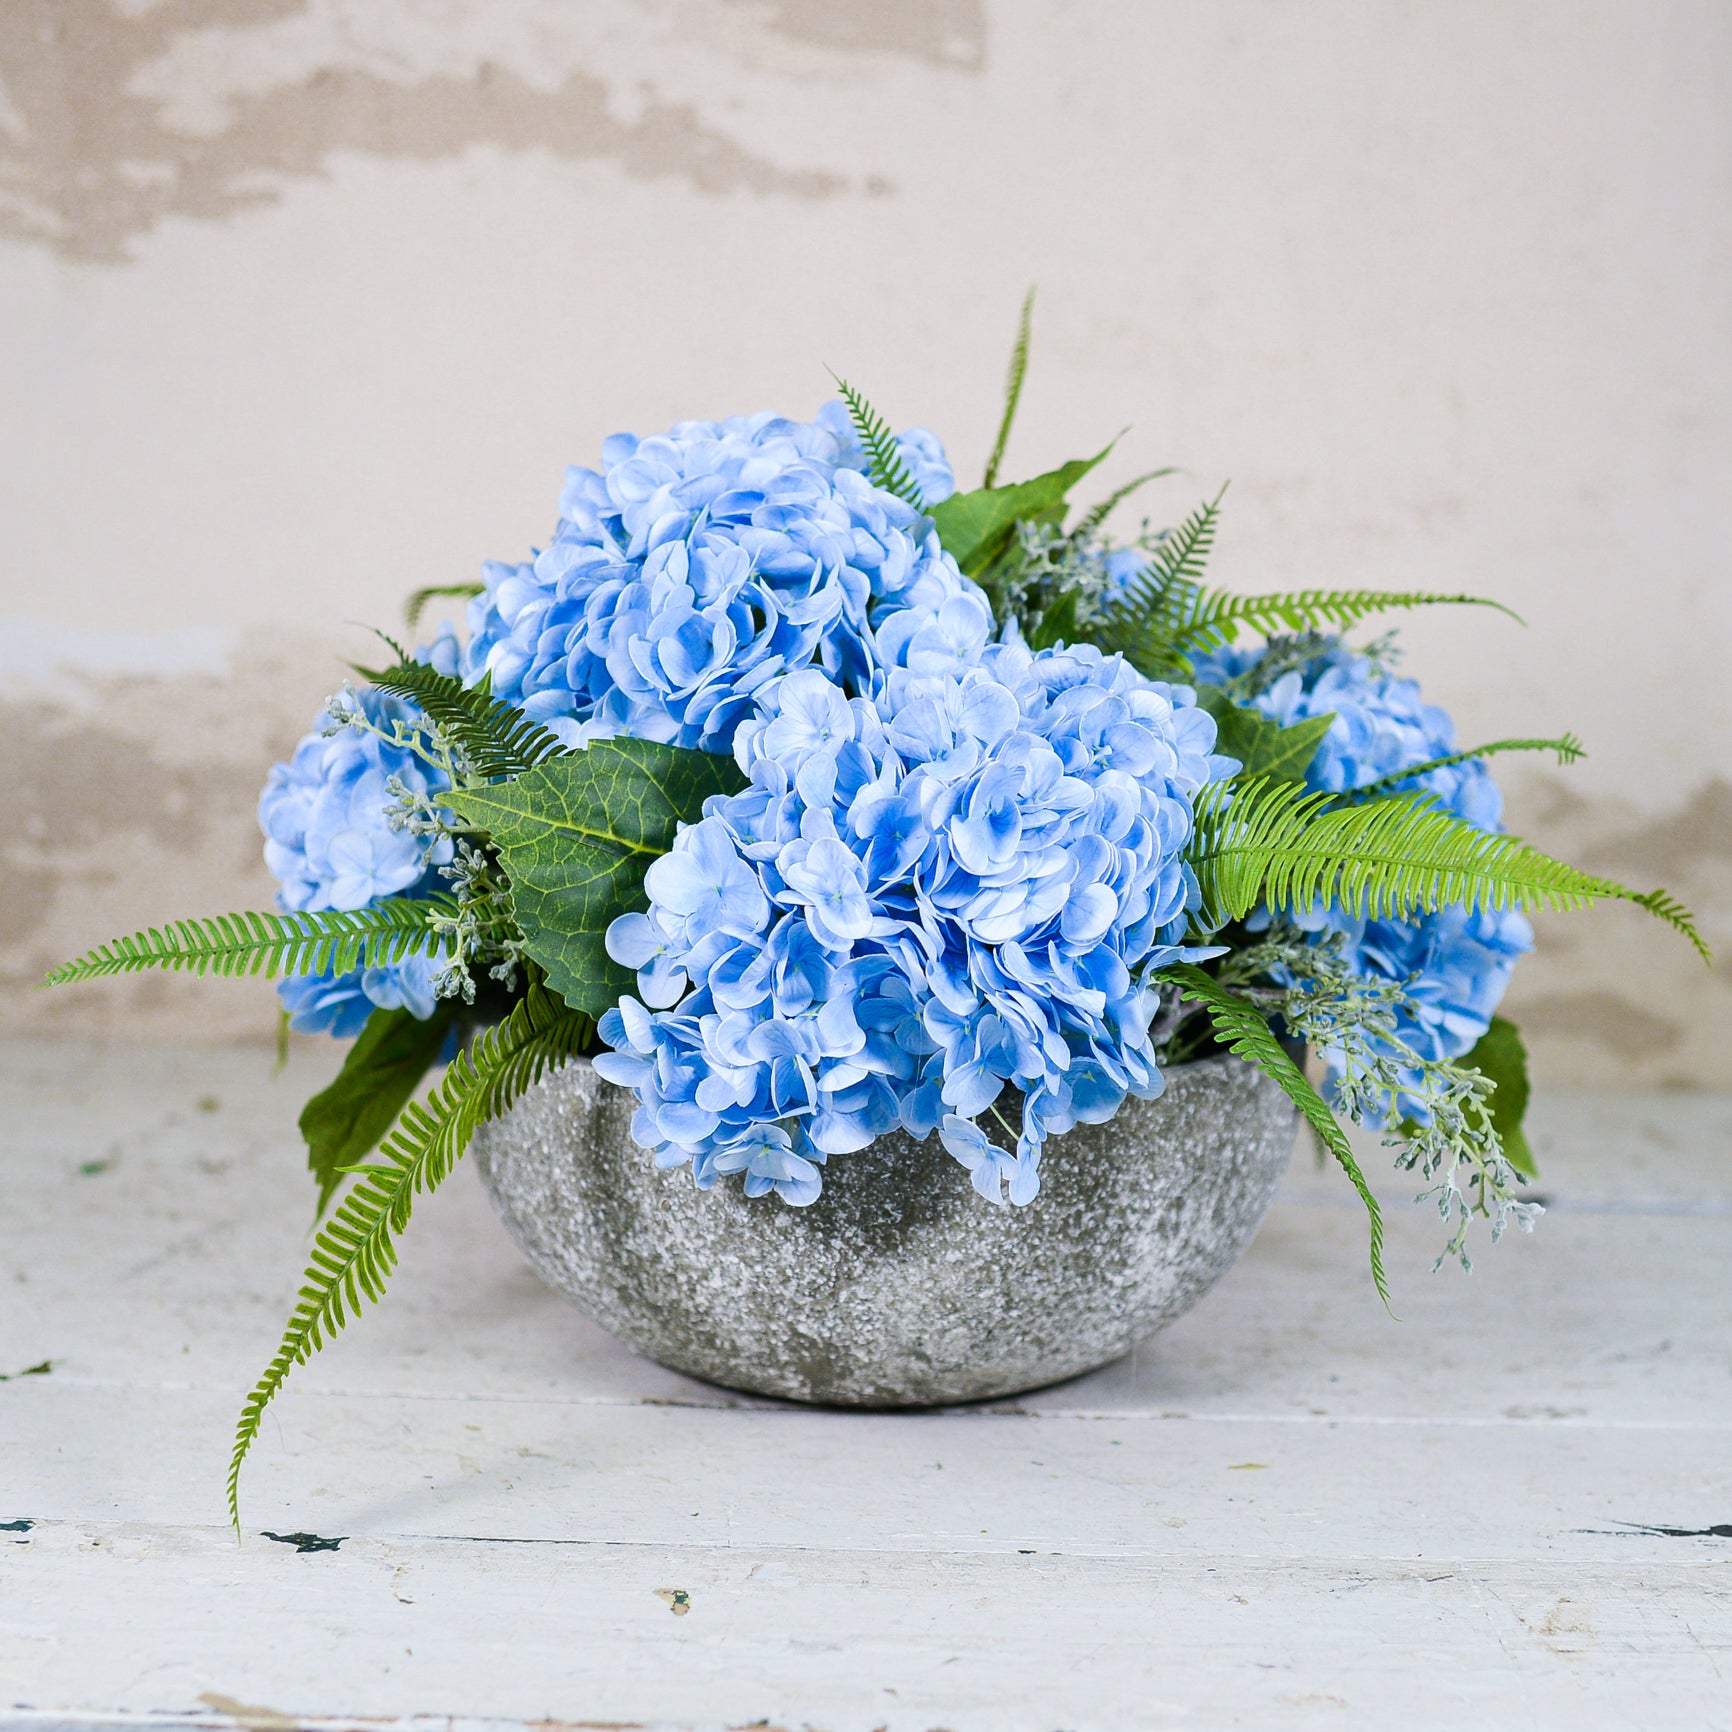 Real Touch Blue Hydrangea Centerpiece Drop In